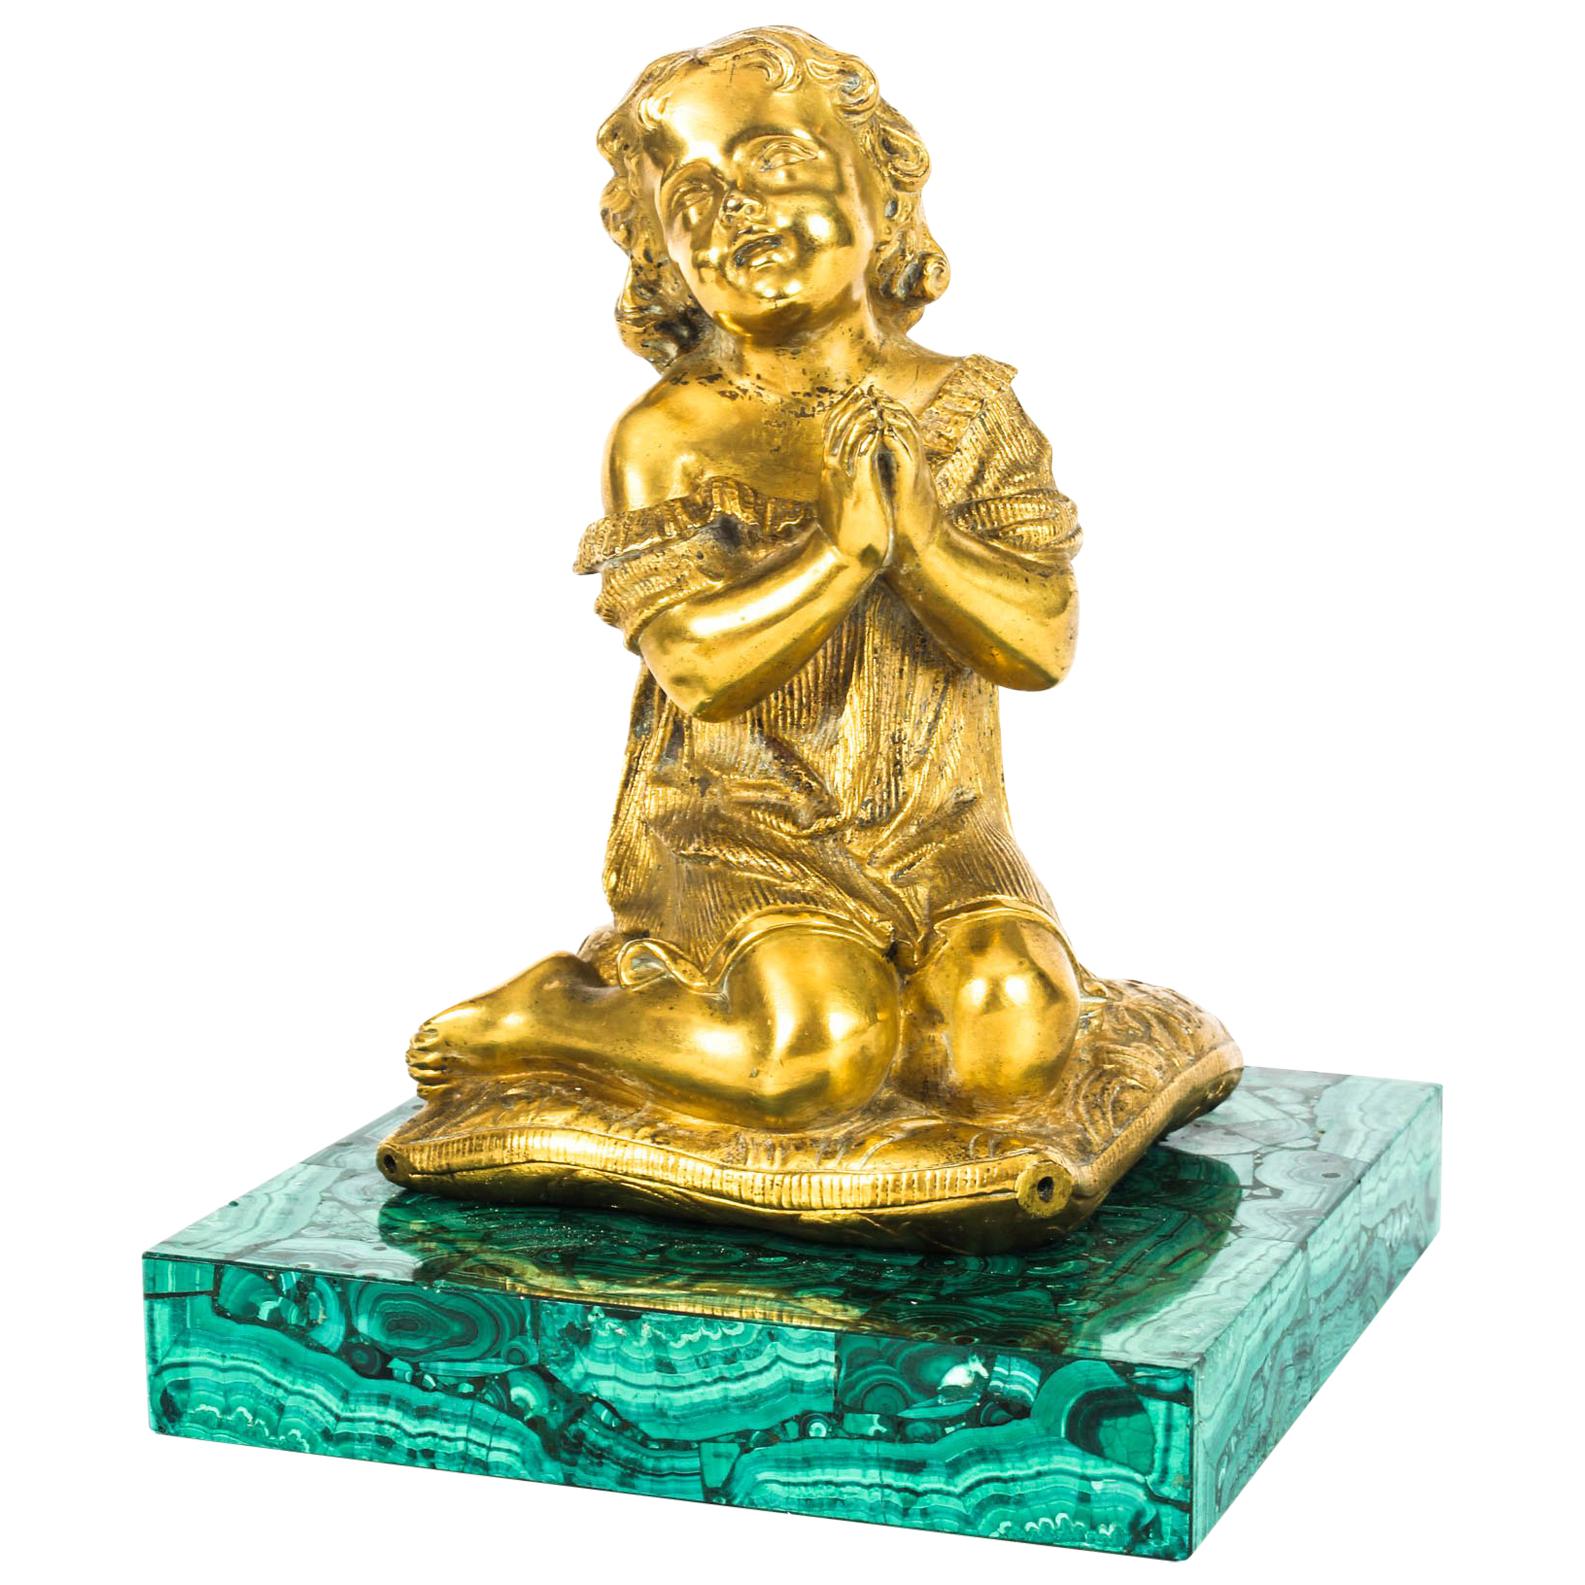 French Malachite and Ormolu-Mounted Sculpture of a Girl Praying, 19th Century